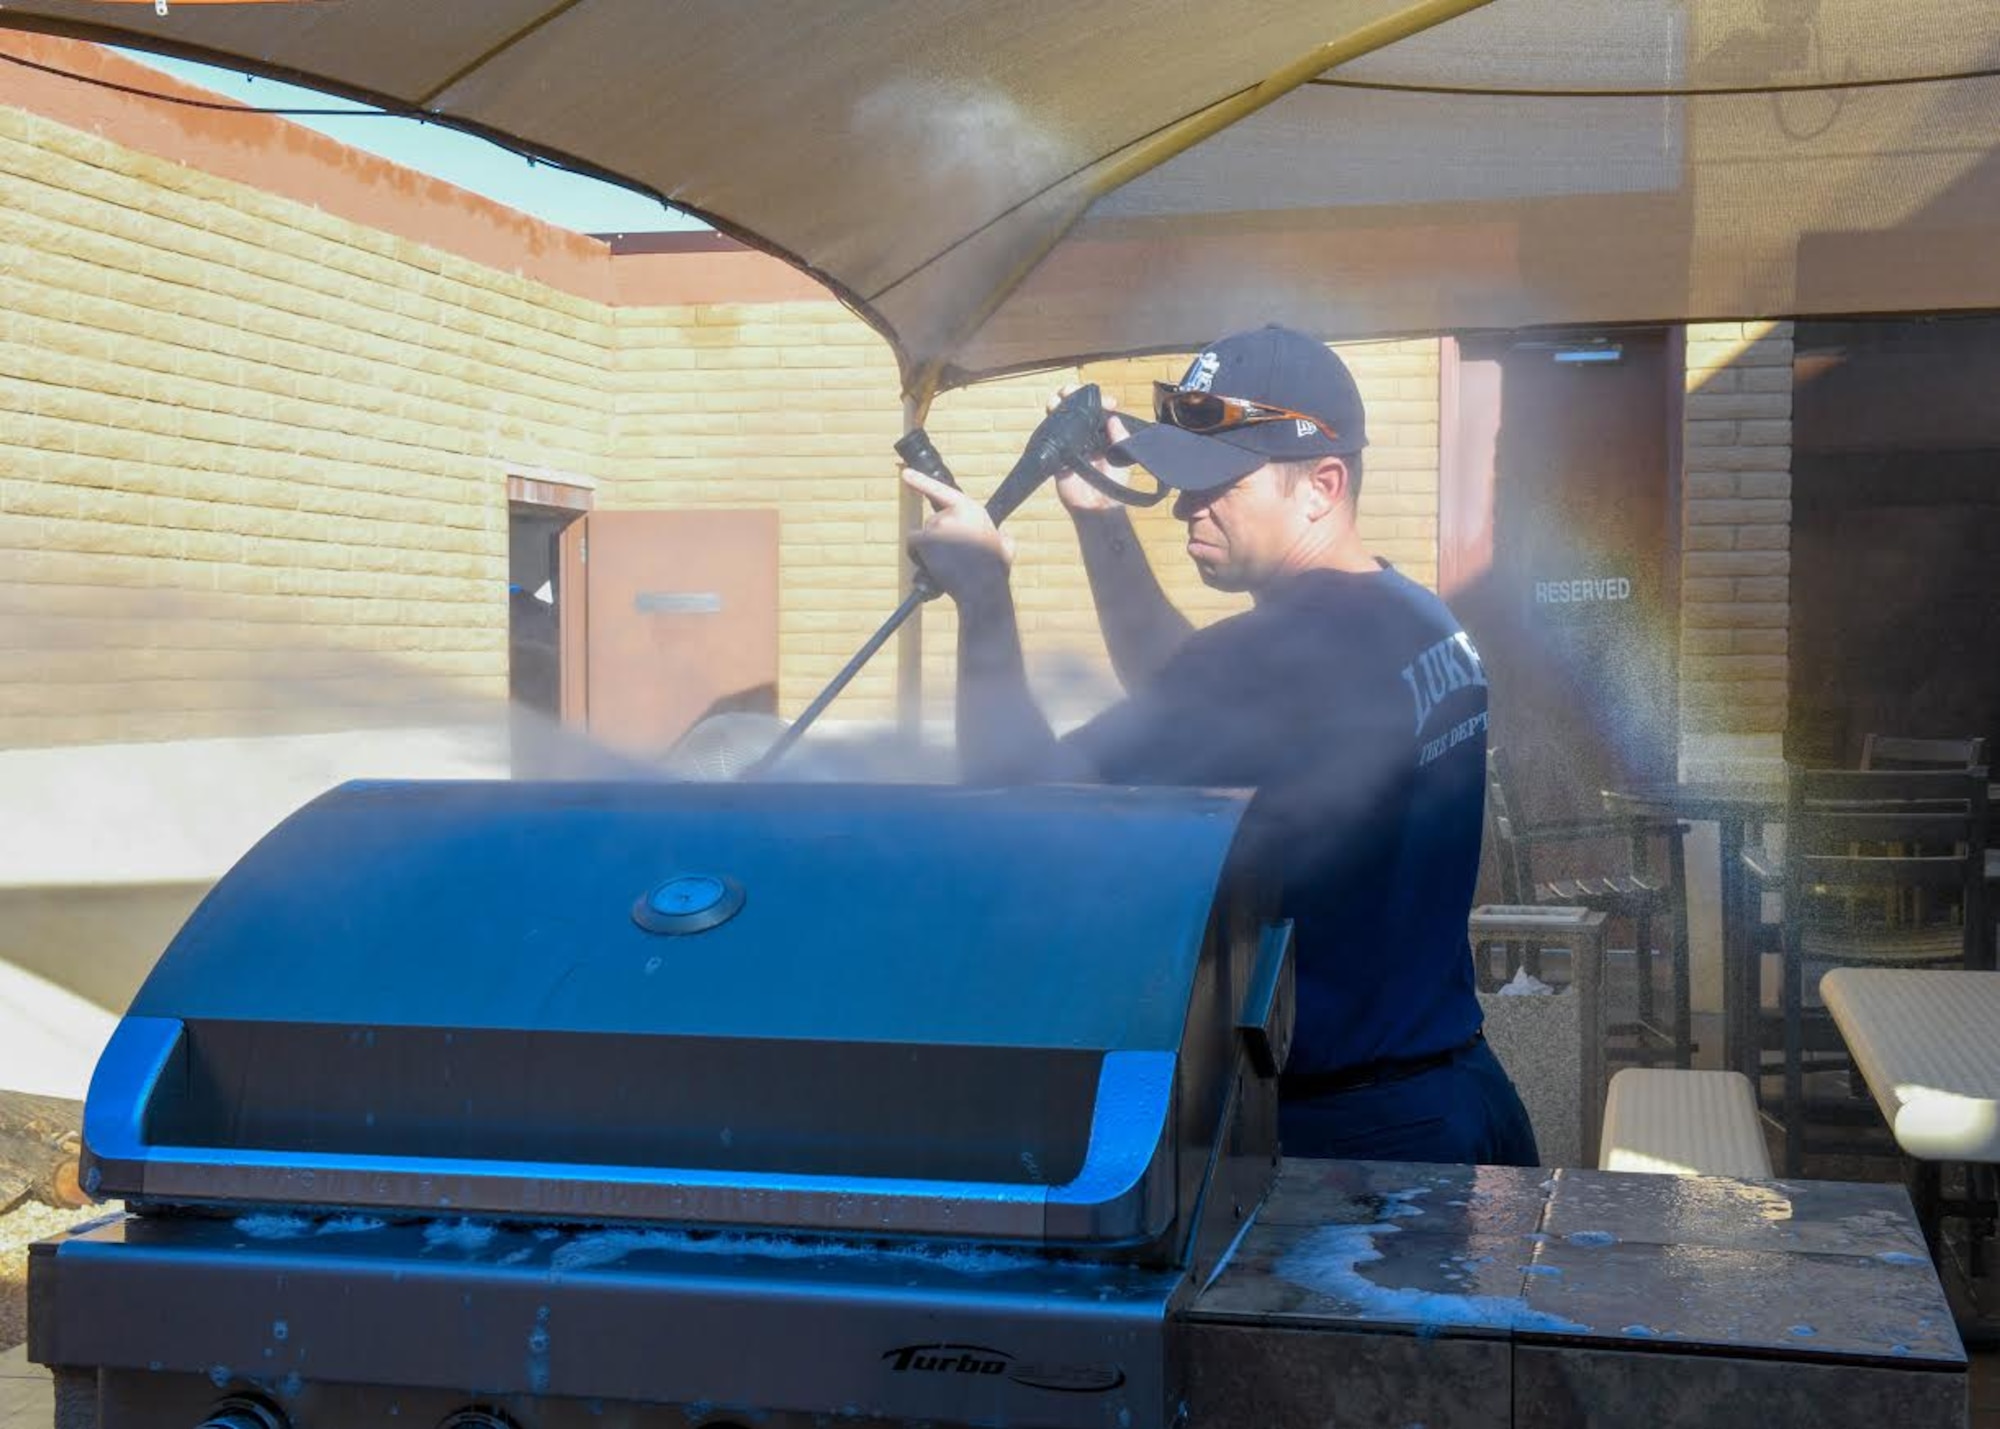 Paul Haidinger, 56th Civil Engineer Squadron lead firefighter, works on a cleaning detail Dec. 9, 2019, at the Luke Air Force Base Fire Department, Ariz.